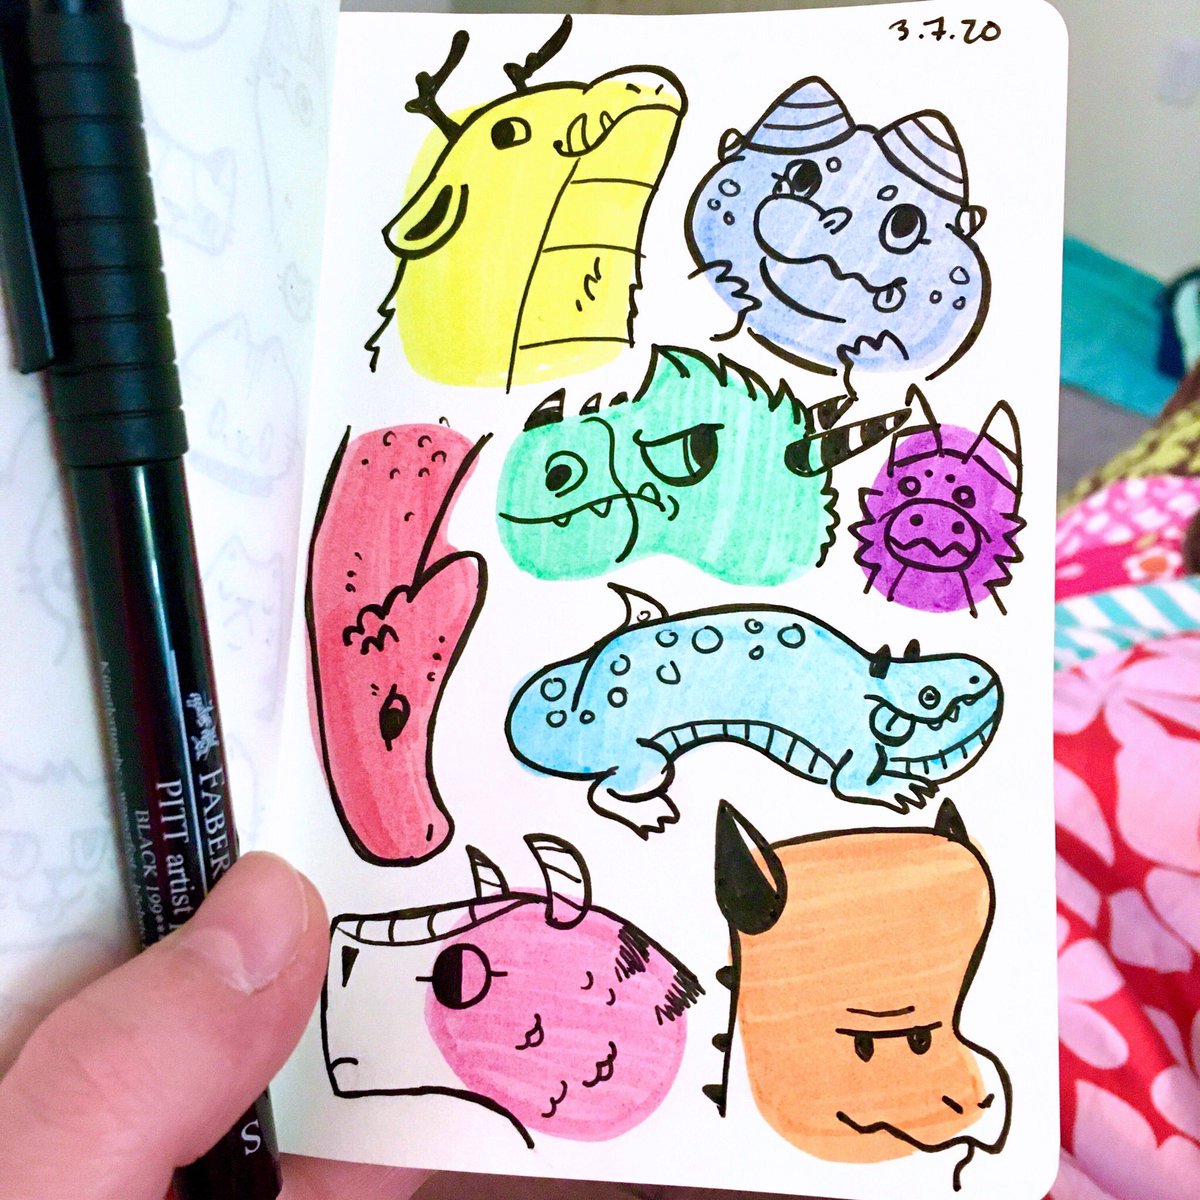 More blobby dragons! These shape doodles are too fun ?? #doodle #sketchbook 